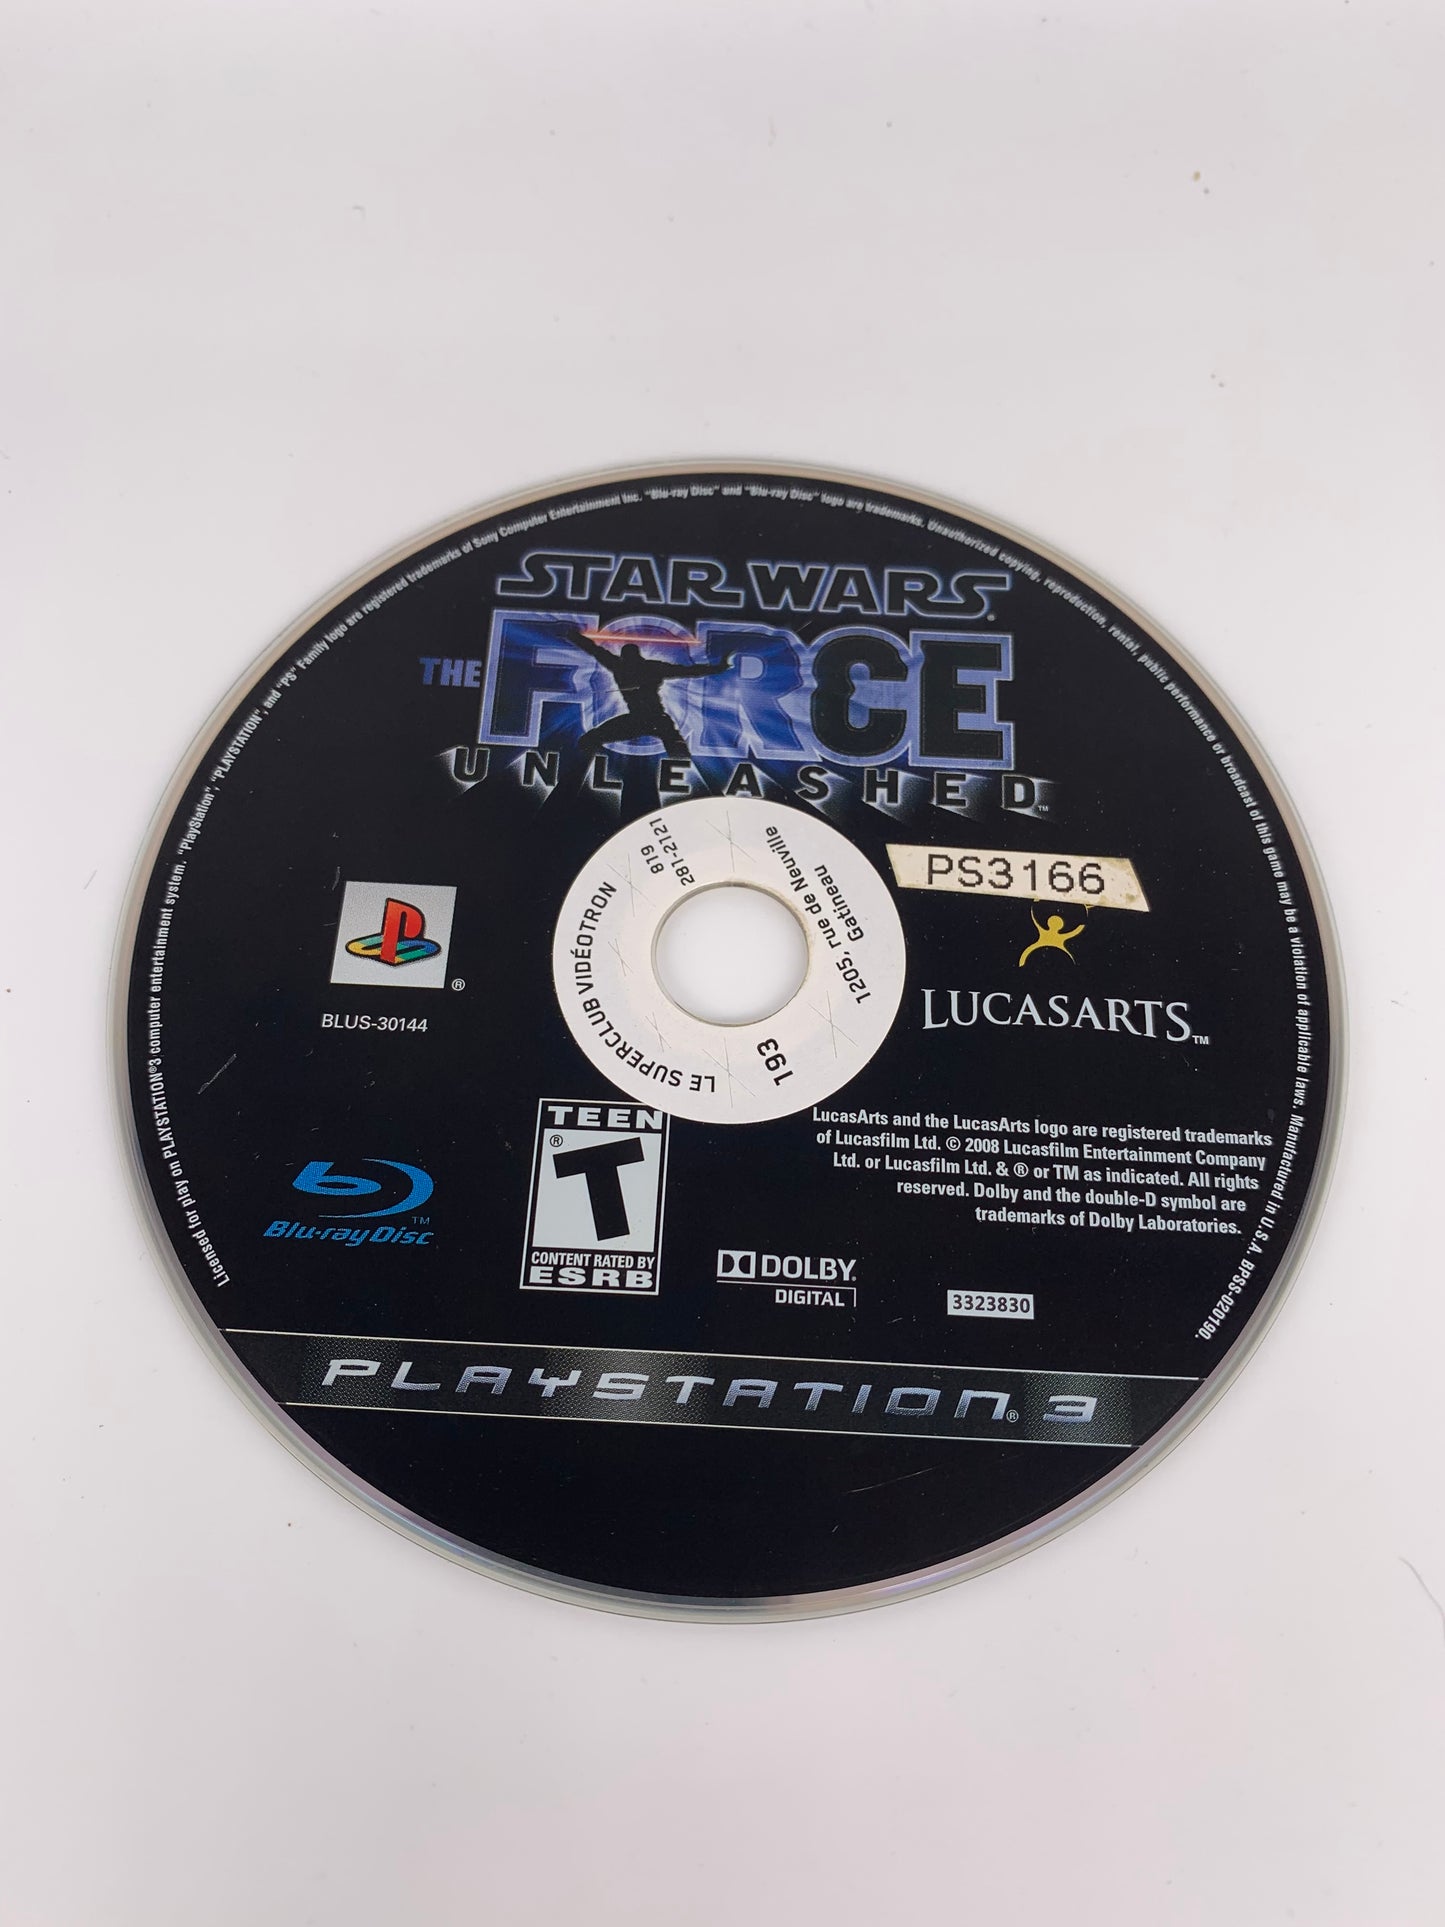 PiXEL-RETRO.COM : SONY PLAYSTATION 3 (PS3) COMPLET CIB BOX MANUAL GAME NTSC STAR WARS THE FORCE UNLEASHED